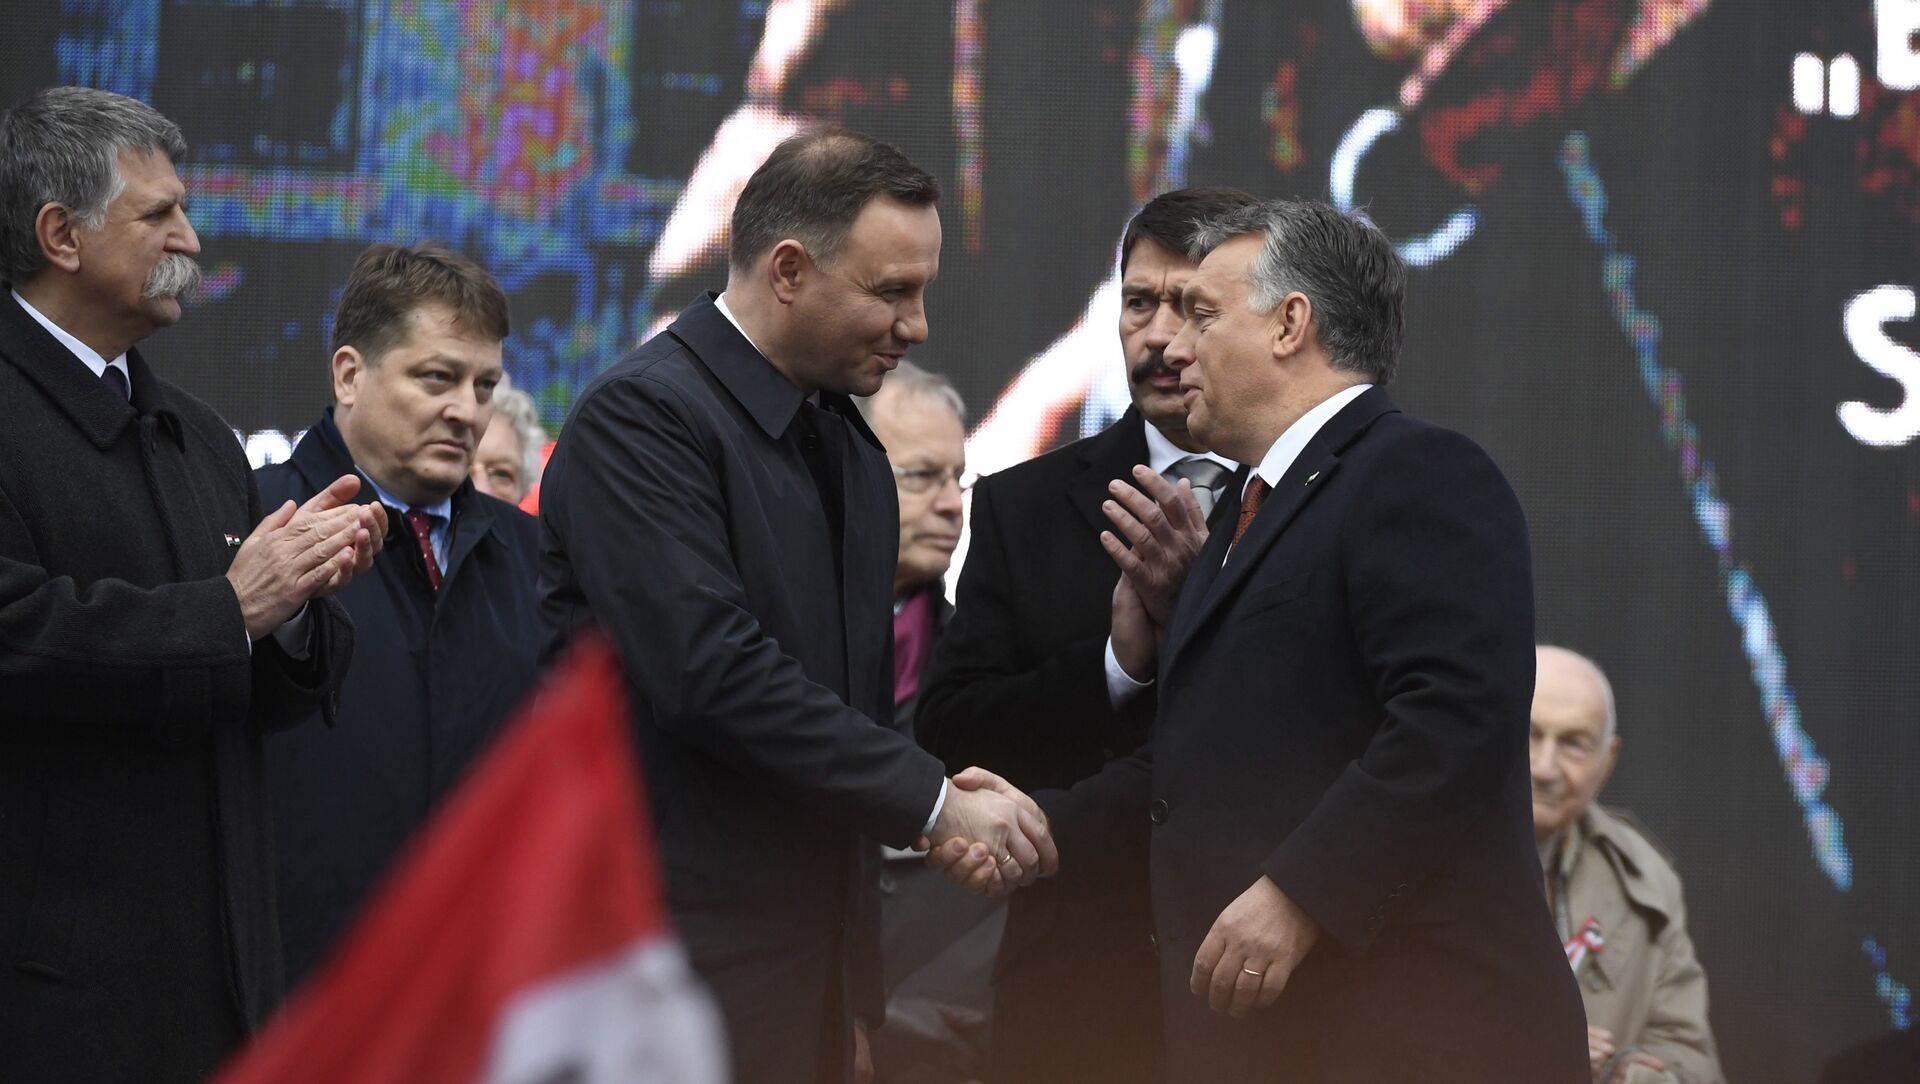 Polish President Andrzej Duda, center left, is welcomed by Hungarian Prime Minister Viktor Orban on the podium as Hungarian President Janos Ader, second right, and Speaker of the Hungarian Parliament Laszlo Kover, left, applaud during the state commemoration ceremony of the 1956 Hungarian revolution and freedom fight against communism and Soviet rule in front of the Parliament building in downtown Budapest, Hungary, Sunday, Oct. 23, 2016 - Sputnik Moldova-România, 1920, 11.02.2021